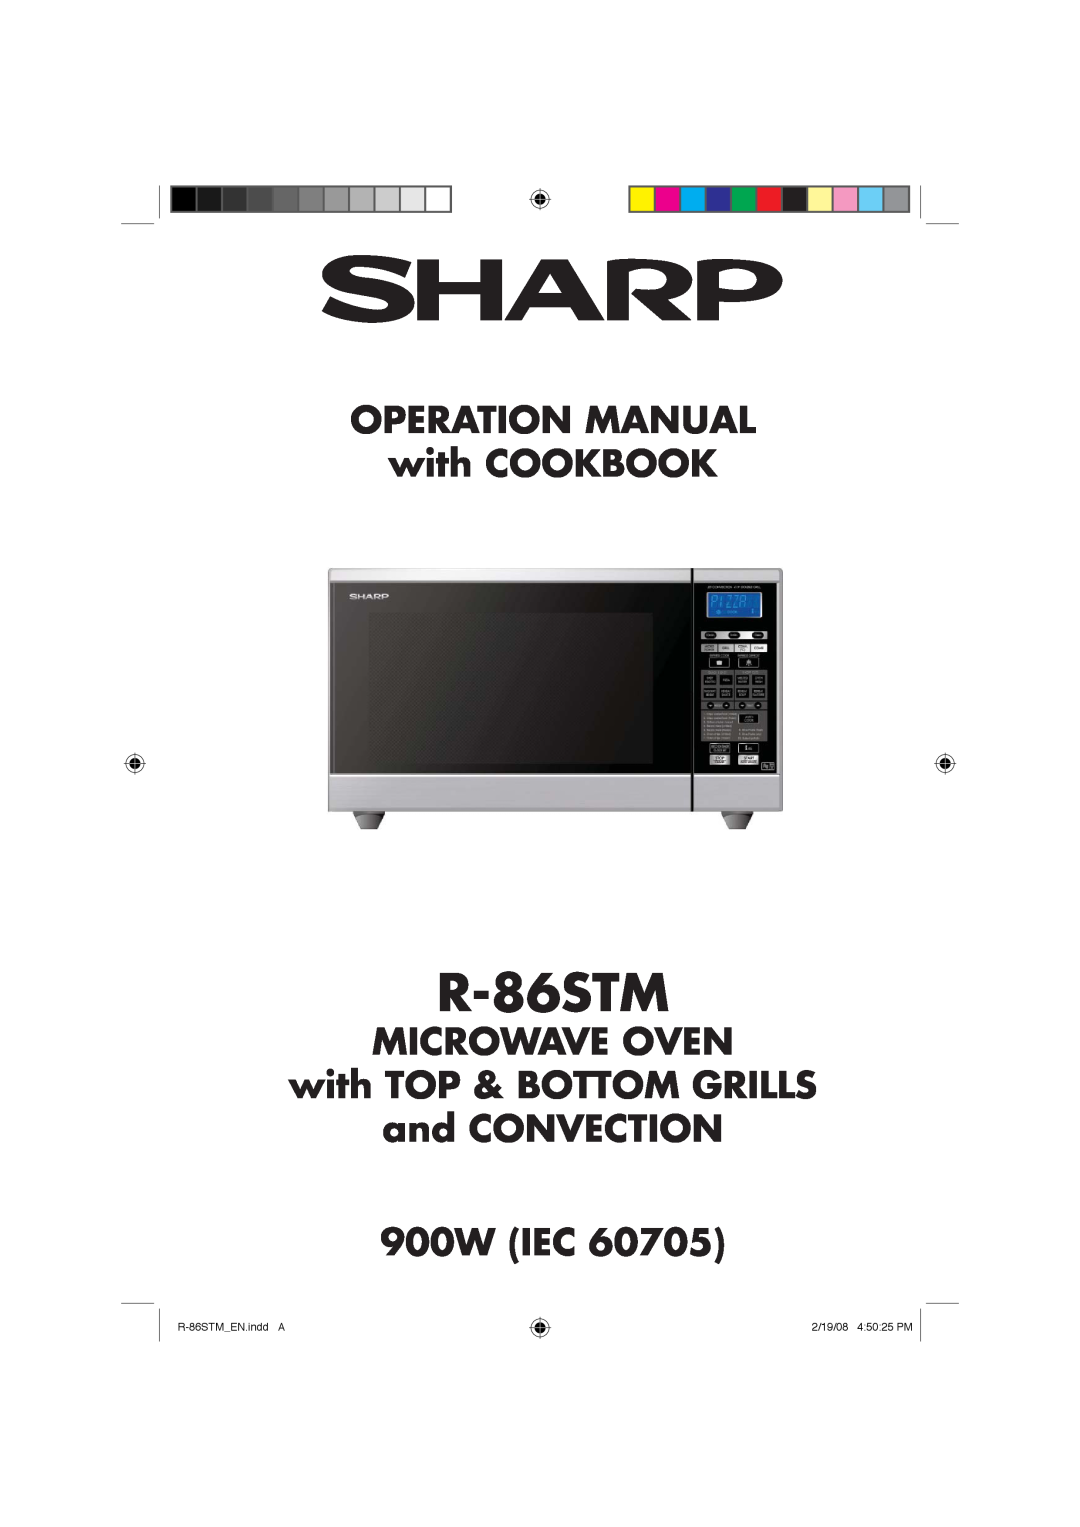 Sharp R-86STM manual OPERATION MANUAL with COOKBOOK, MICROWAVE OVEN with TOP & BOTTOM GRILLS and CONVECTION 900W IEC 